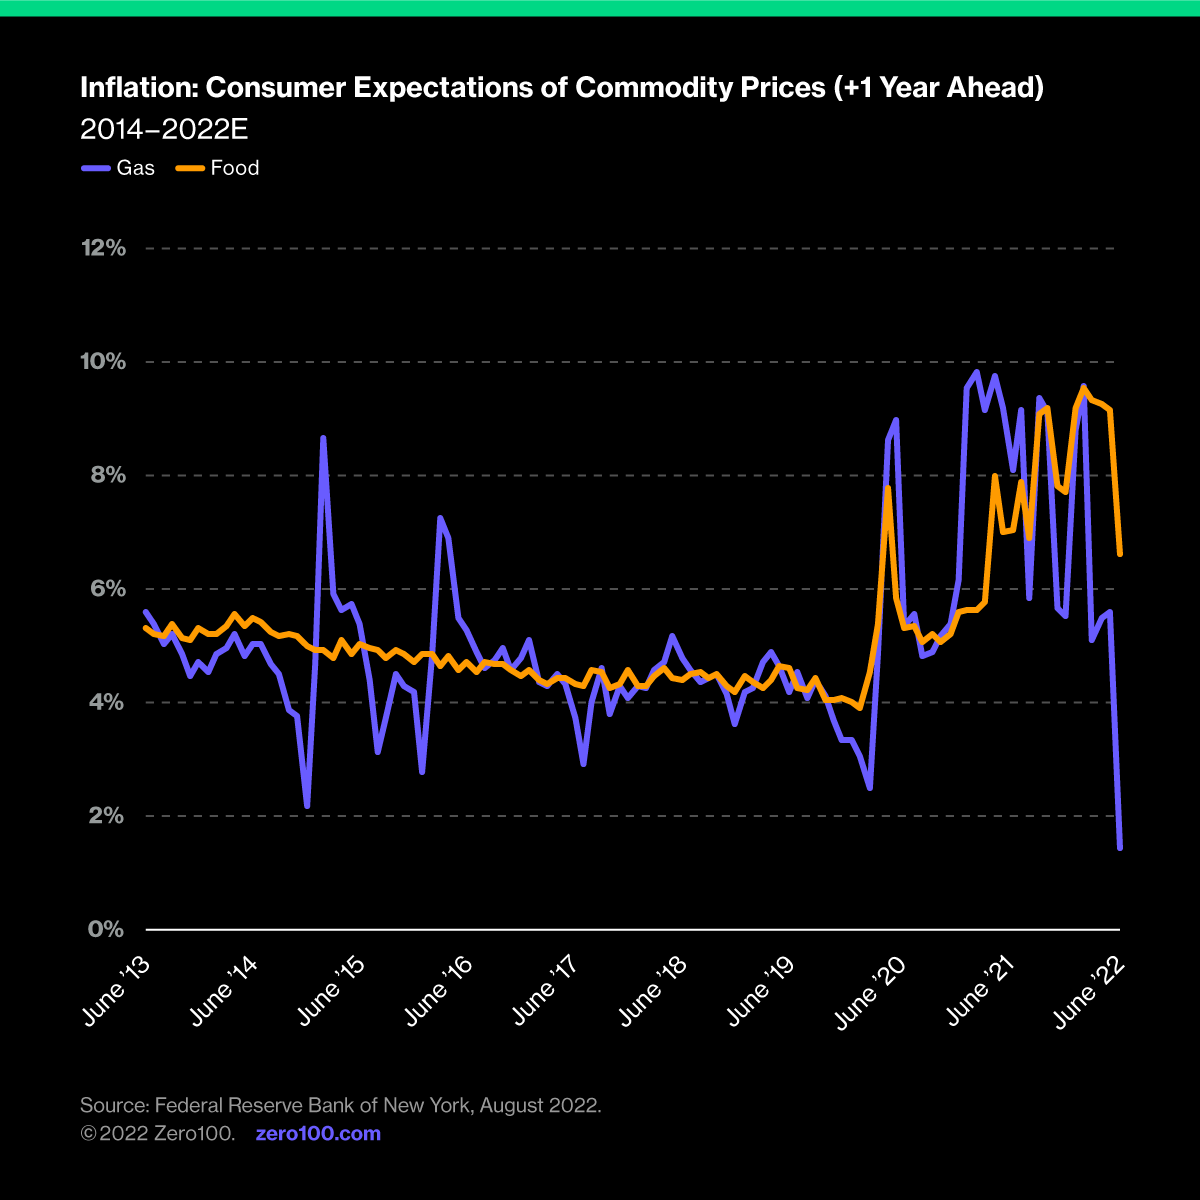 Graph depicting consumer expectation of commodity prices for gas and food, from 2014 until 2022. Source: Federal Reserve Bank of New York, August 2022.